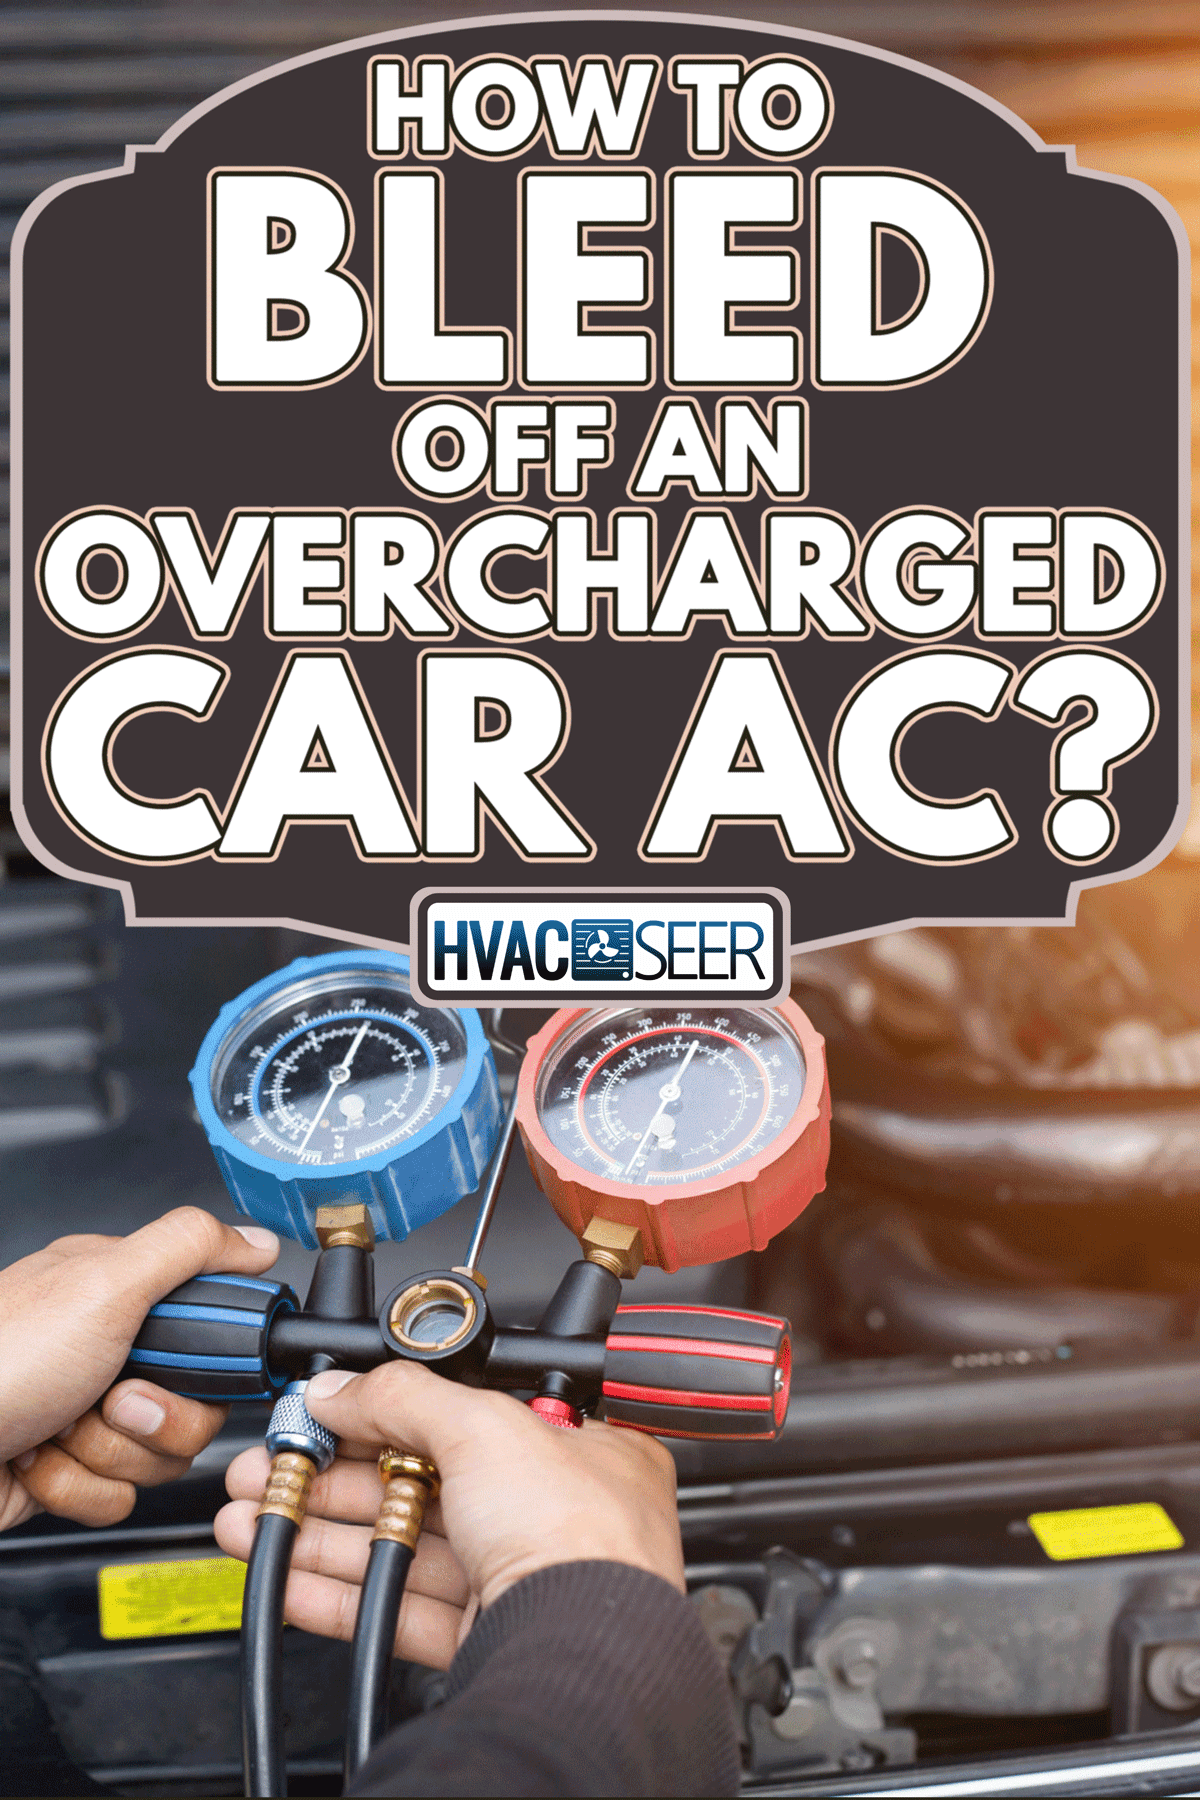 Checking a car air conditioning system refrigerant recharge, How To Bleed Off An Overcharged Car AC?